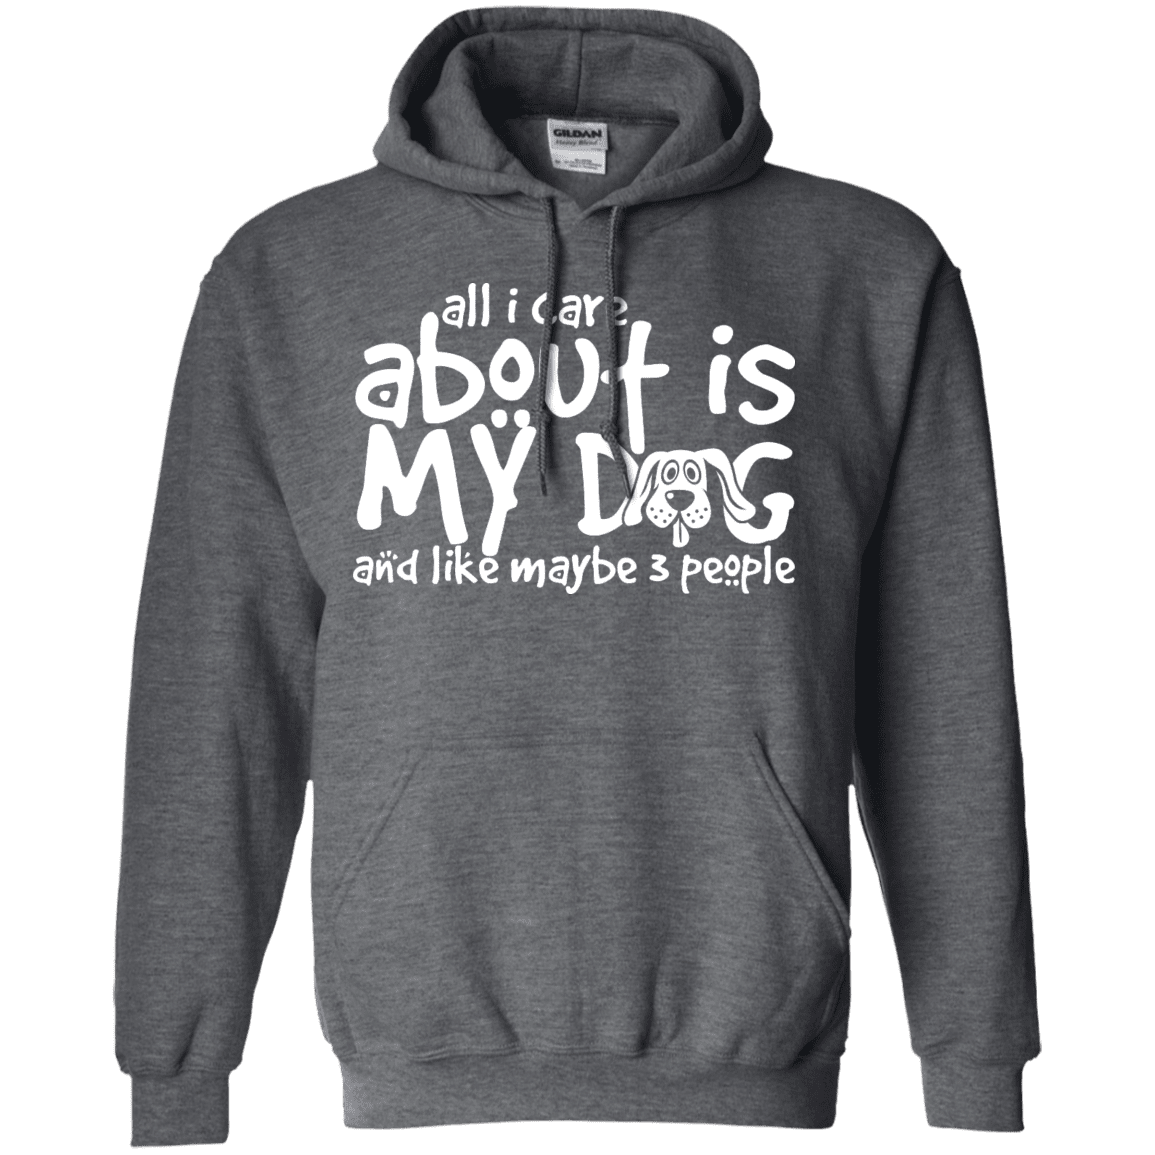 All I Care About Is My Dog - Hoodie.